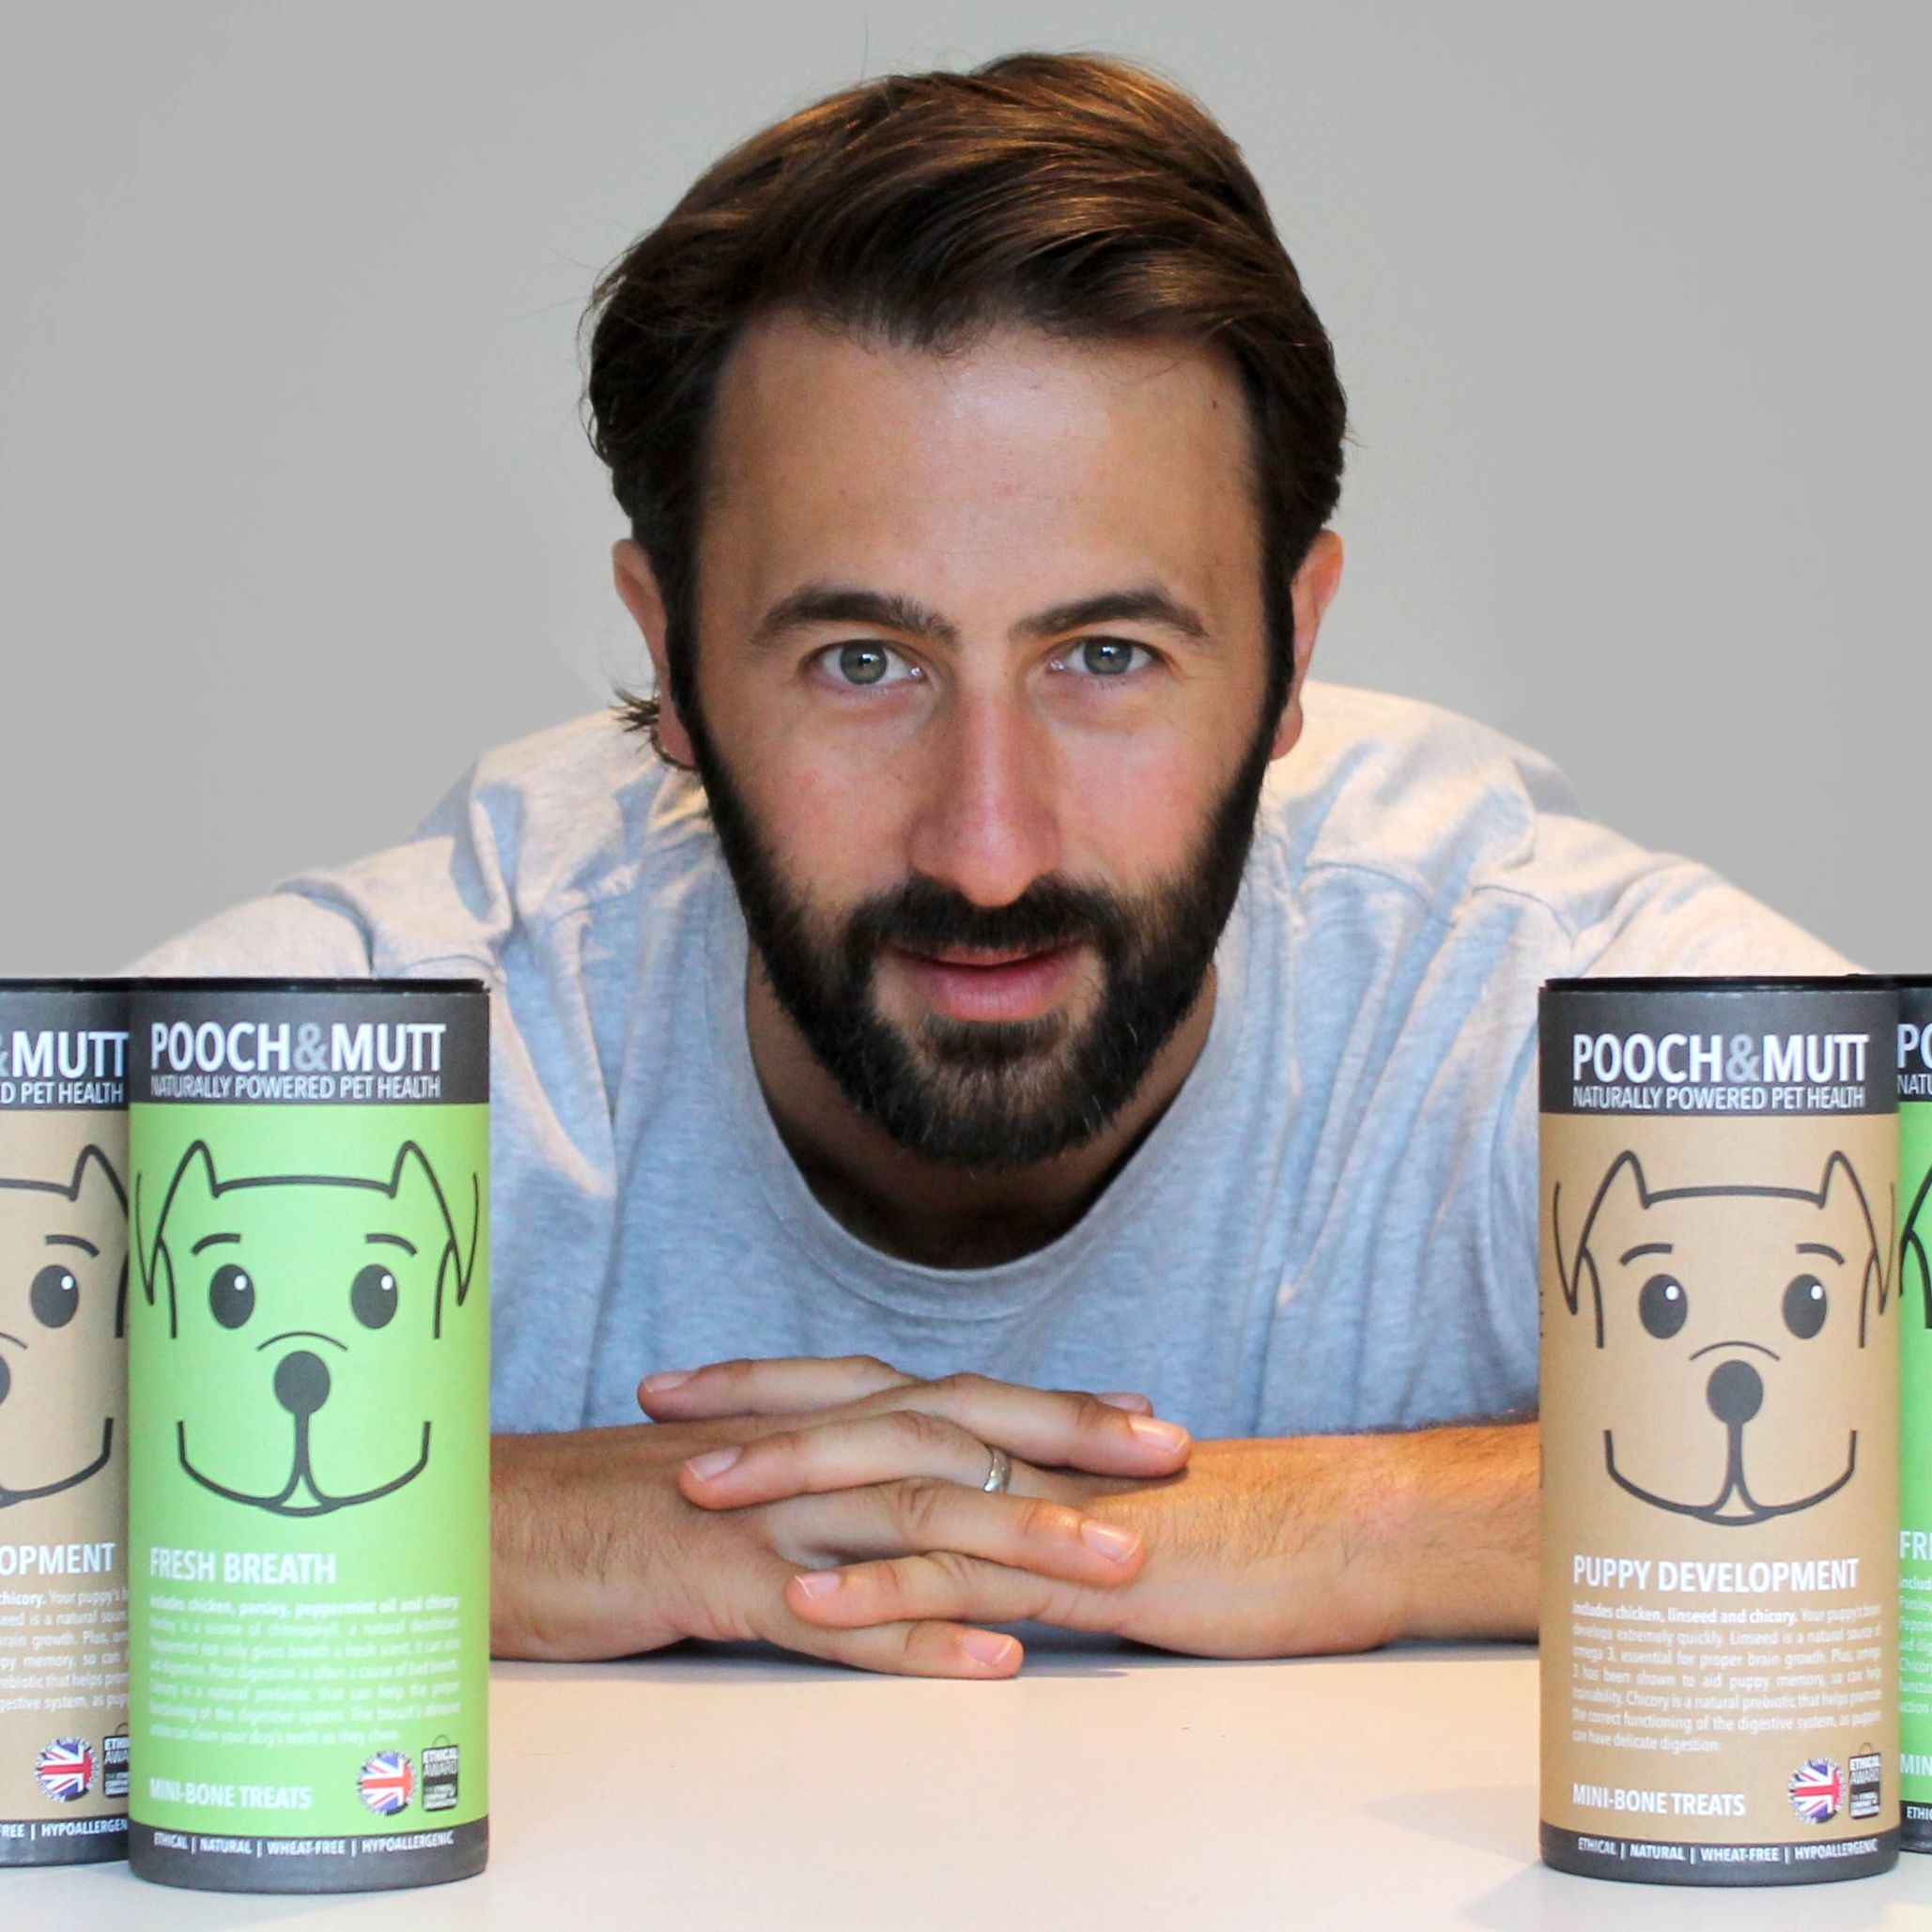 Start-up Stories with Guy Blaskey - CEO and Founder of Pooch & Mutt